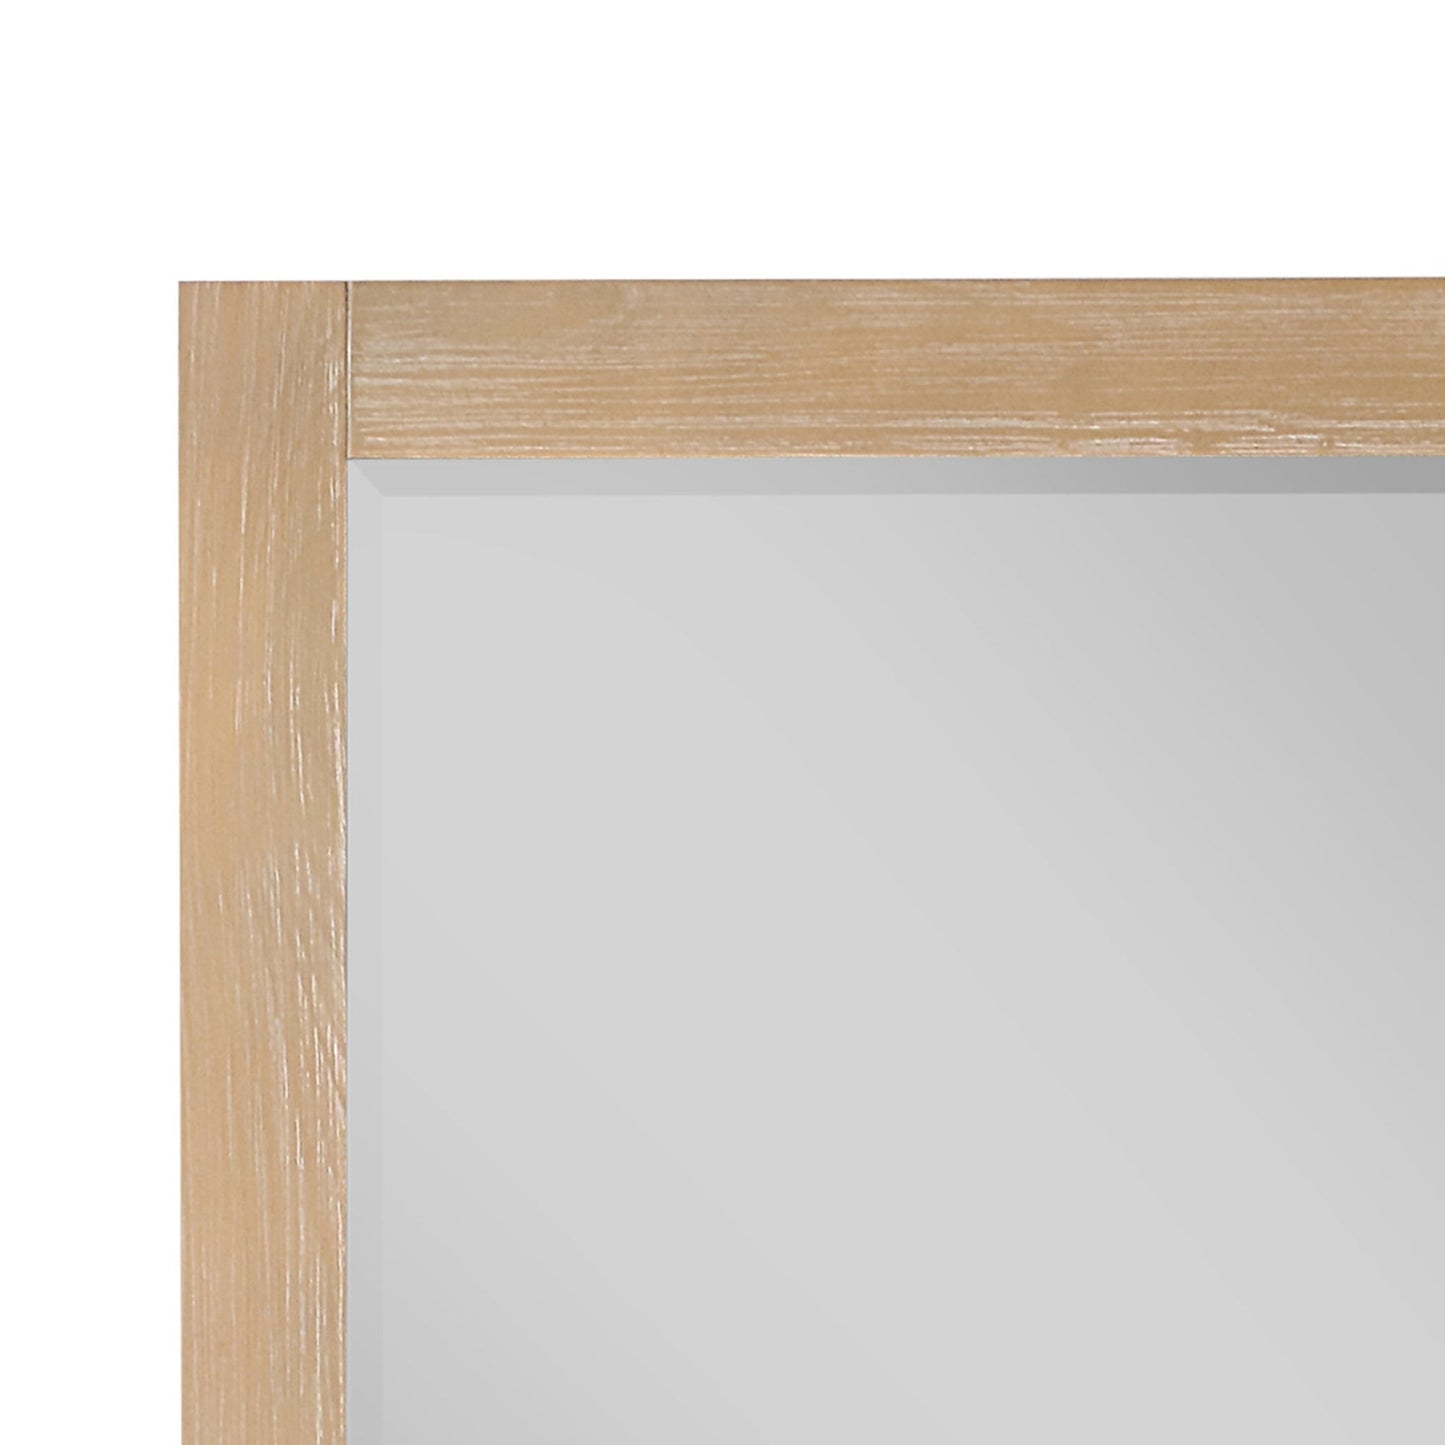 Altair Ivy 27" x 36" Rectangle Weathered Pine Wood Framed Wall-Mounted Mirror